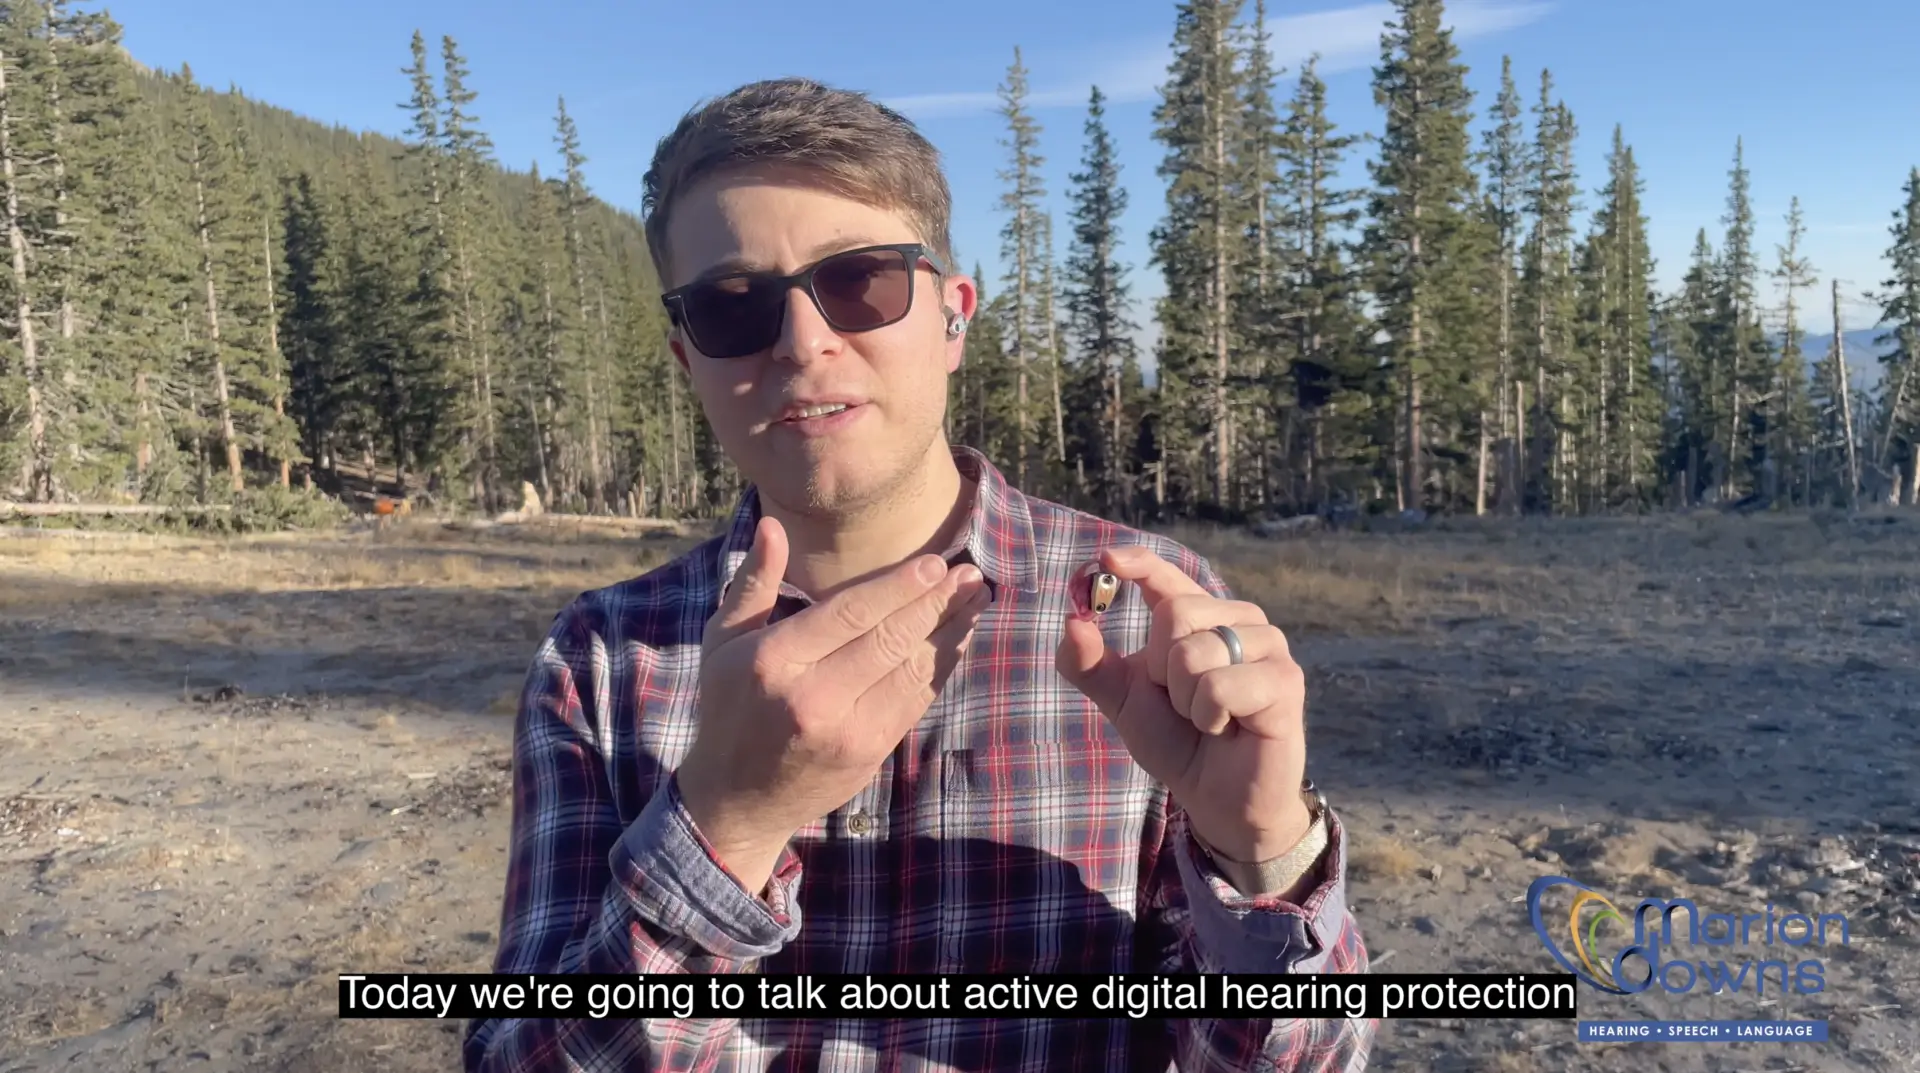 video of a man talking about digital hearing protection